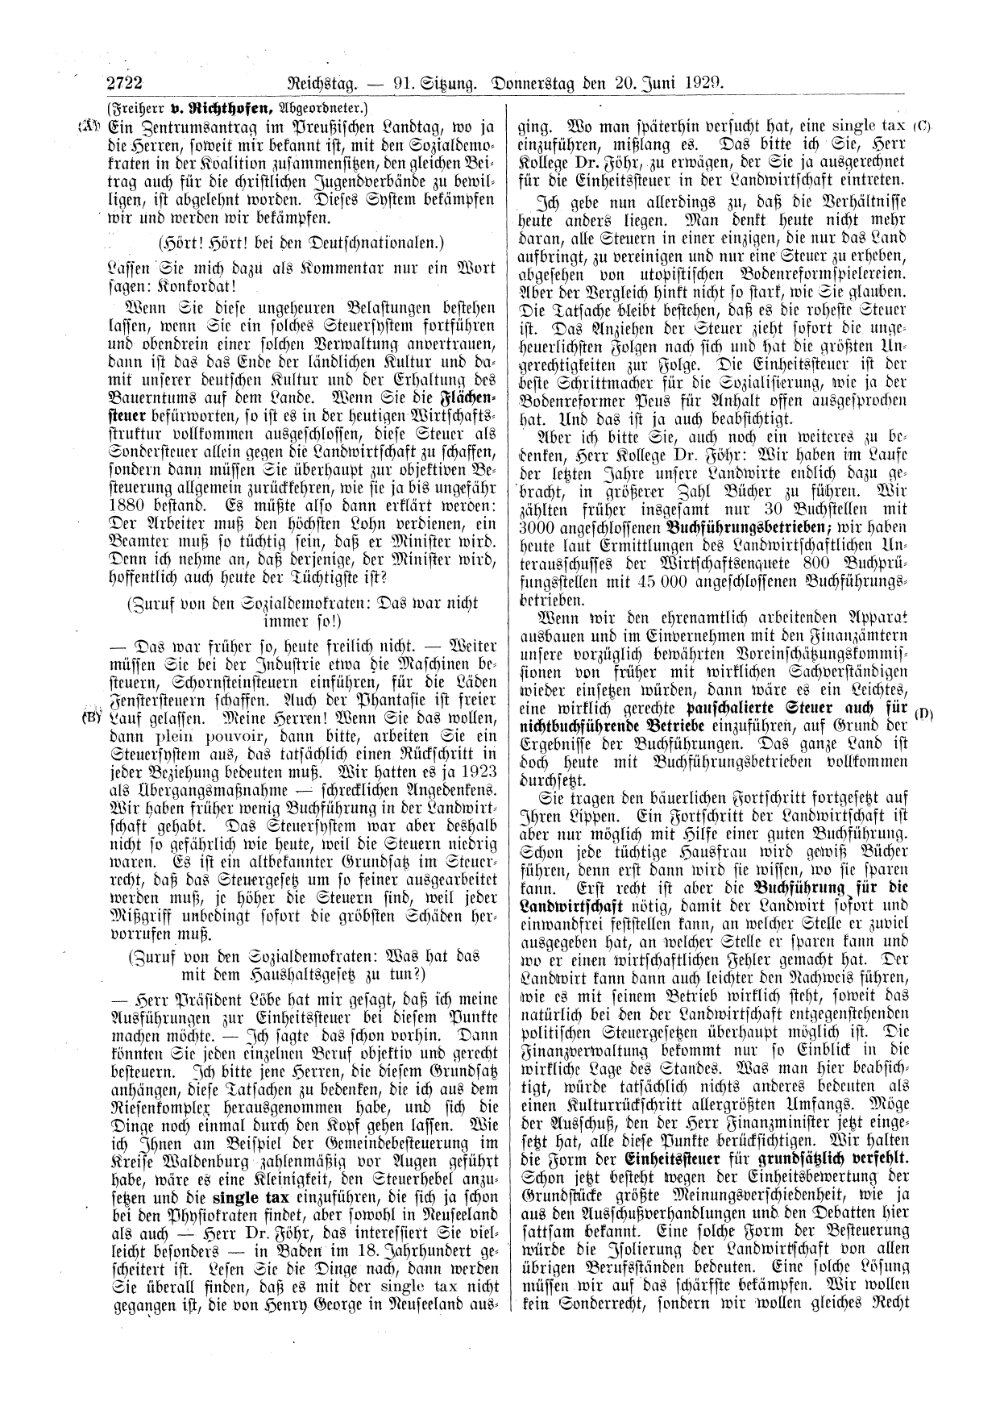 Scan of page 2722